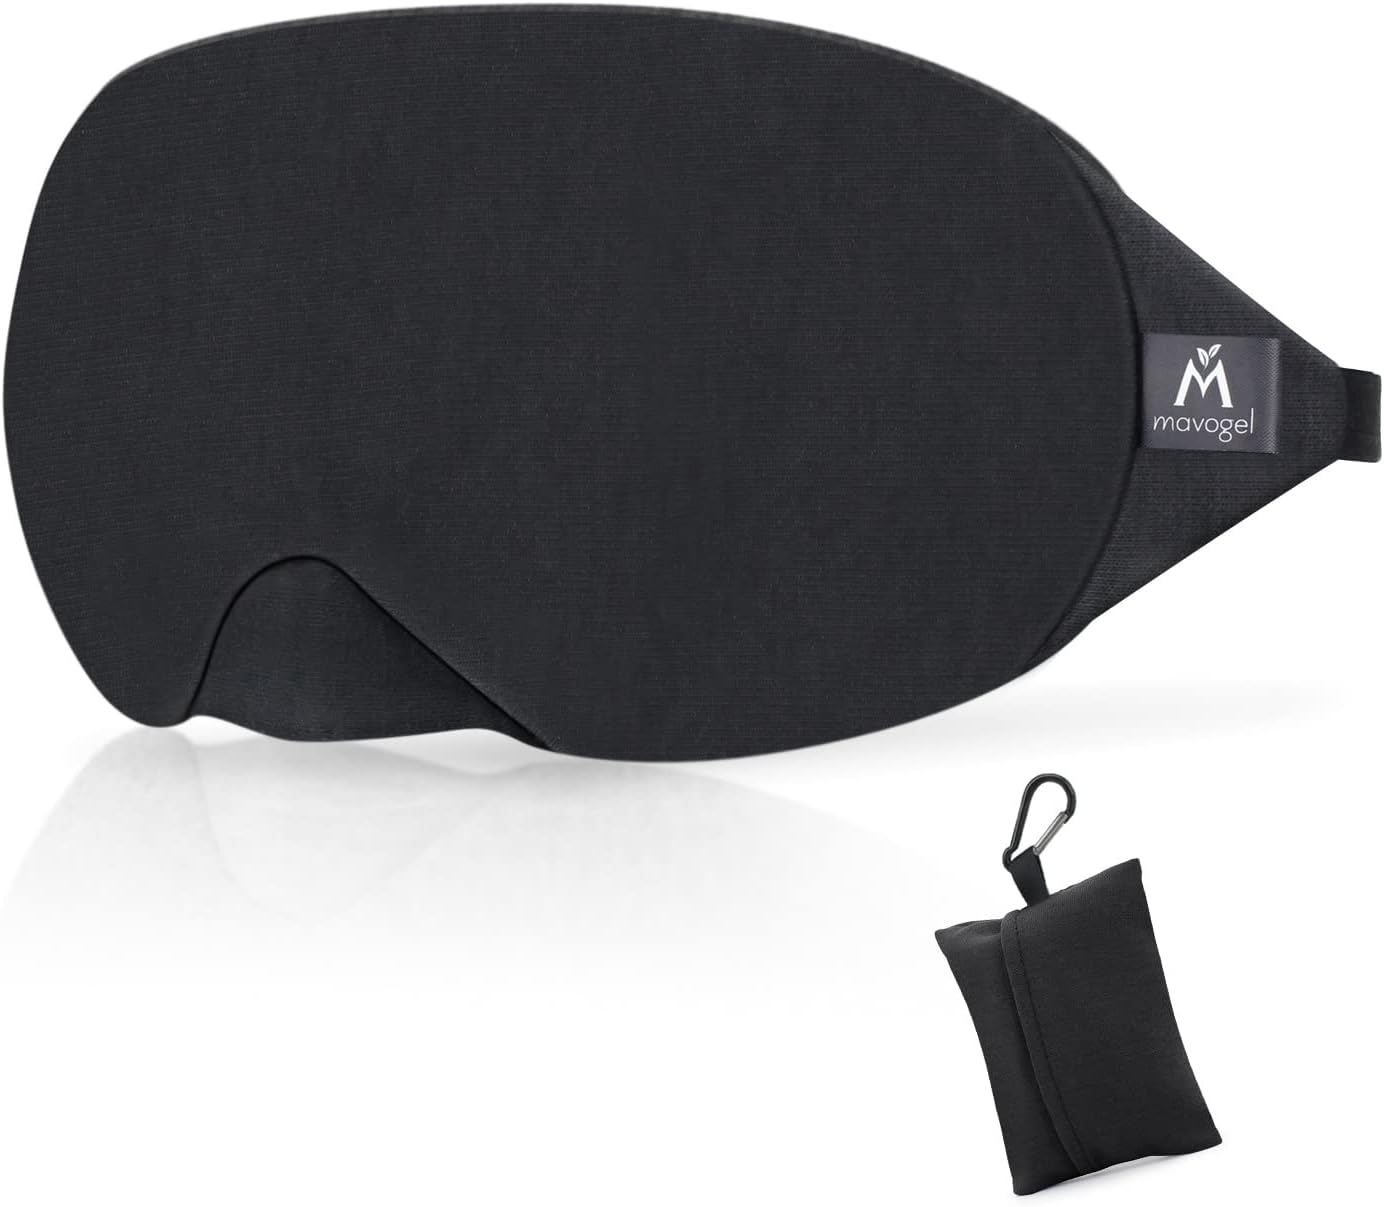 Mavogel Cotton Sleep Eye Mask Black with Travel Pouch RRP £5.58 CLEARANCE XL £3.99